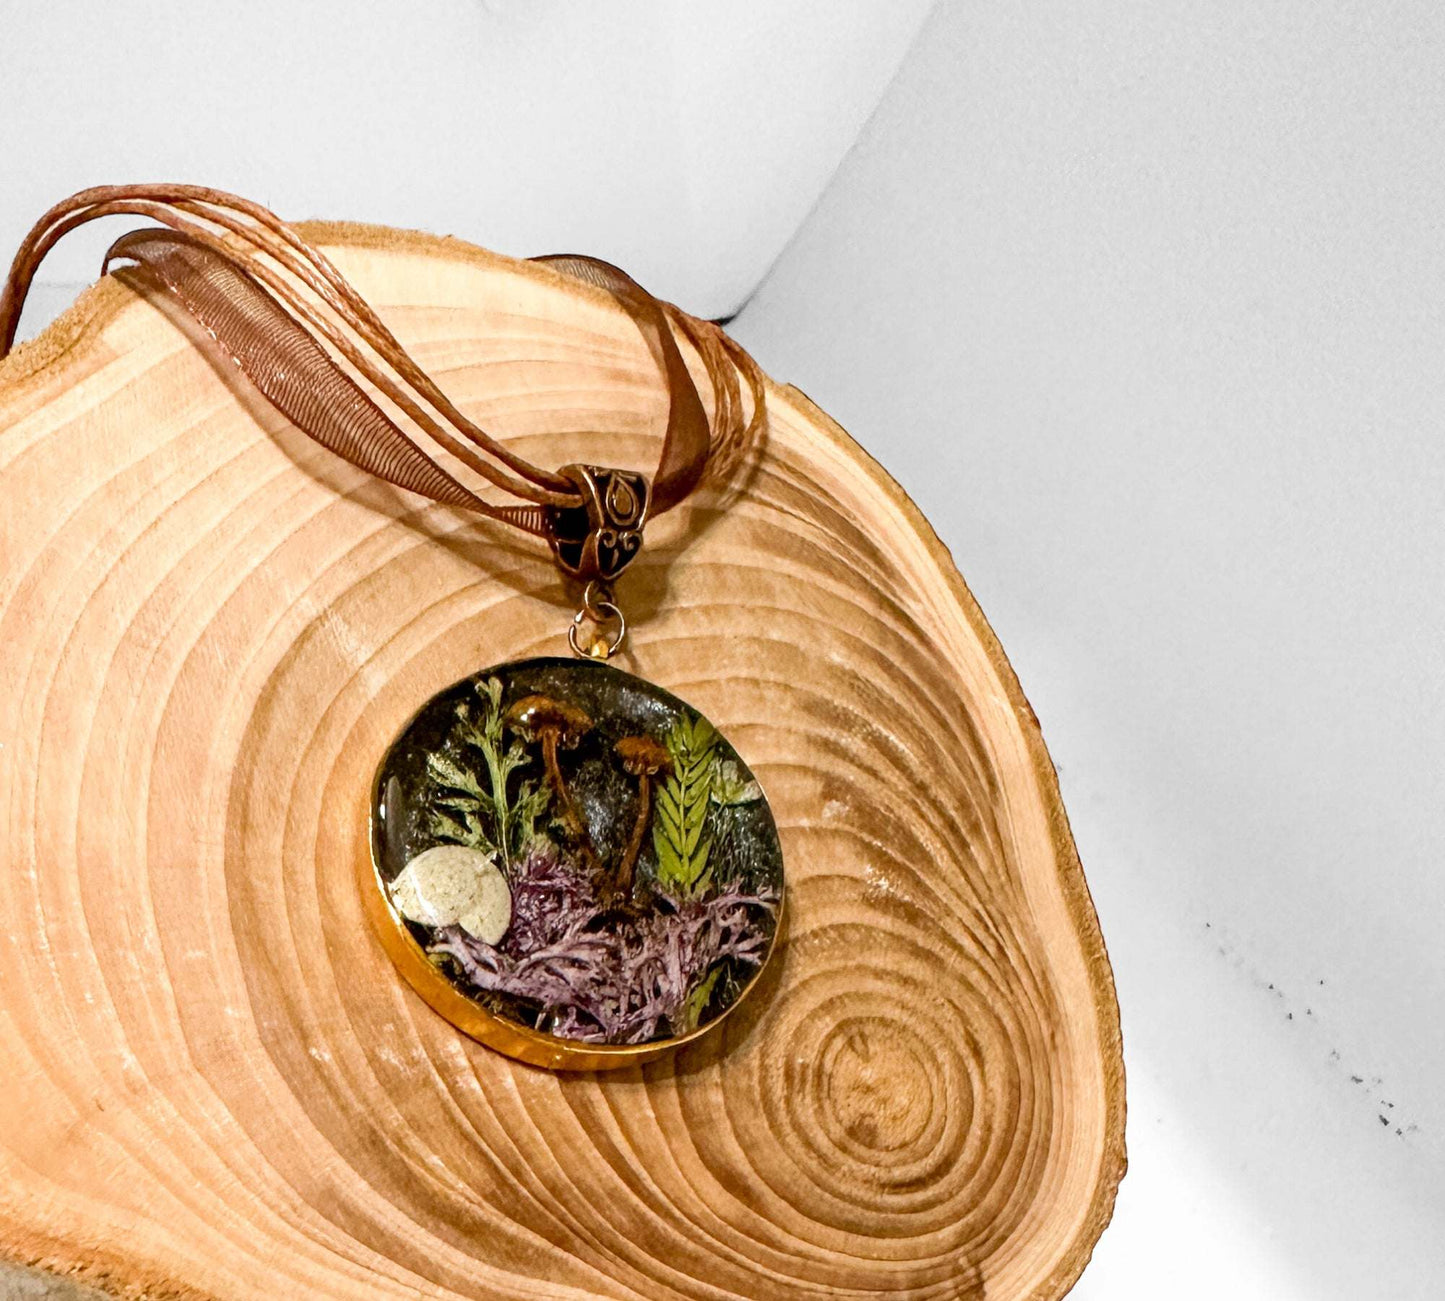 Forest at Night - Resin Botanical Necklace with Mini Mushrooms & Ferns